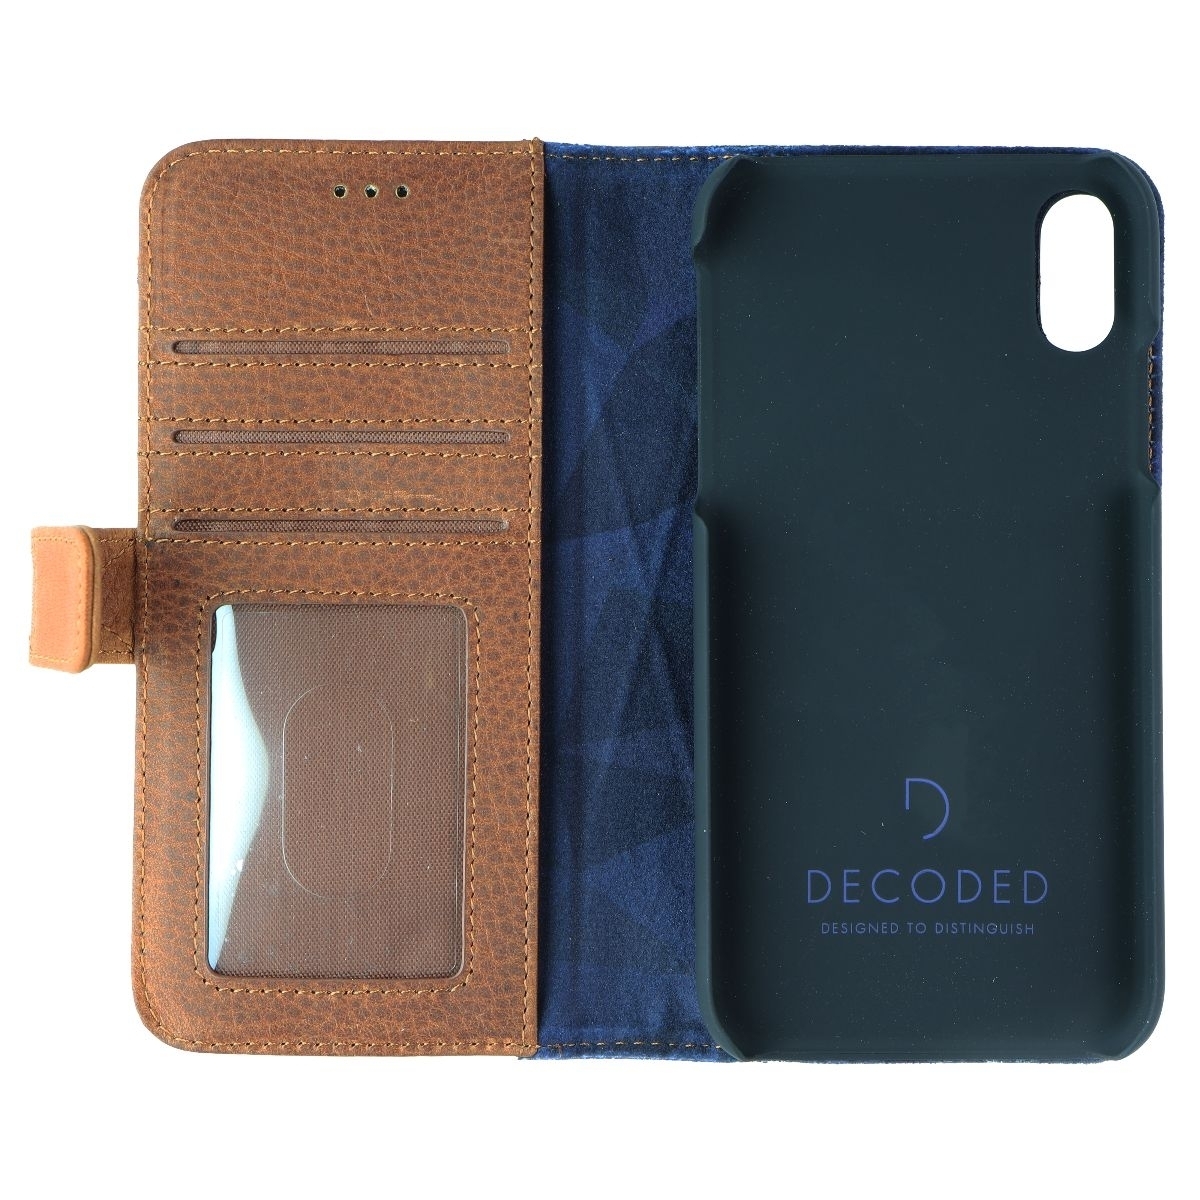 DECODED Full Grain Leather Folio + Case For Apple IPhone XR - Cinnamon Brown (Refurbished)